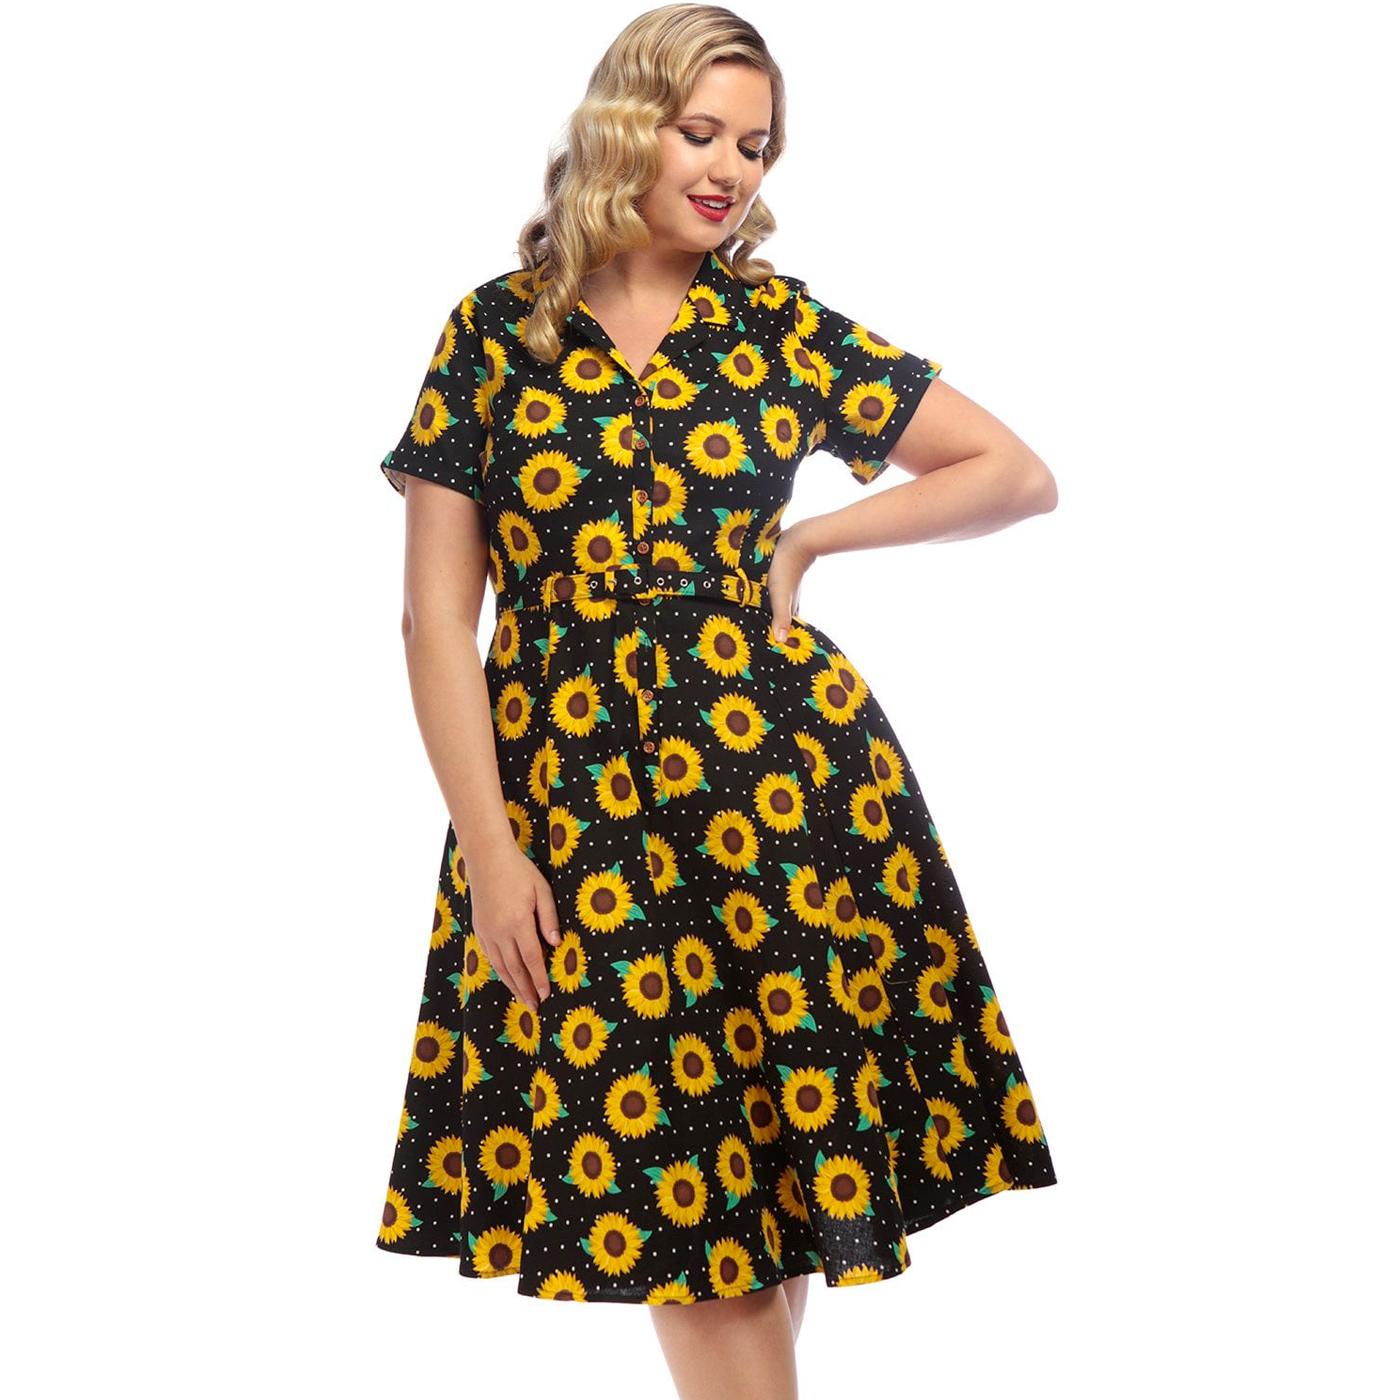 Caterina COLLECTIF Sunflower 40s Swing Dress